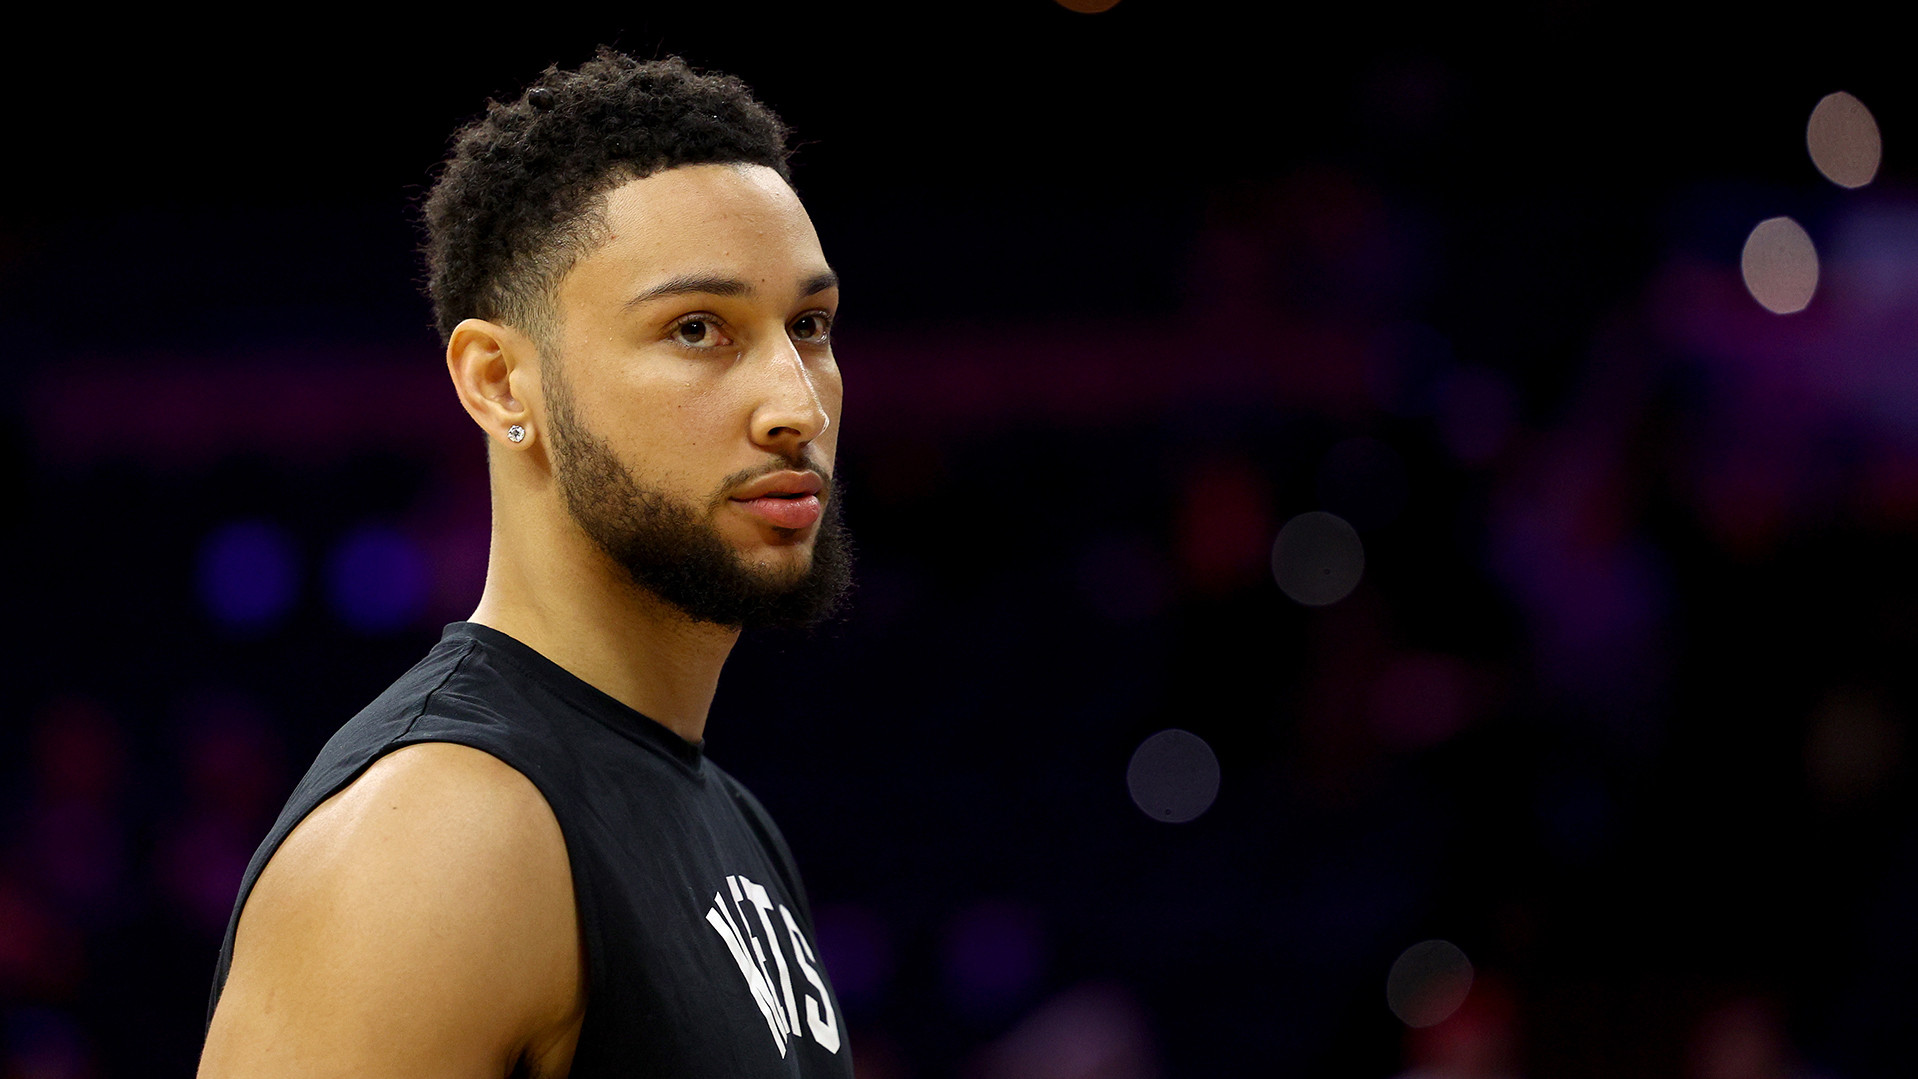 Ben Simmons of the Brooklyn Nets warms up before the game against the Philadelphia 76ers